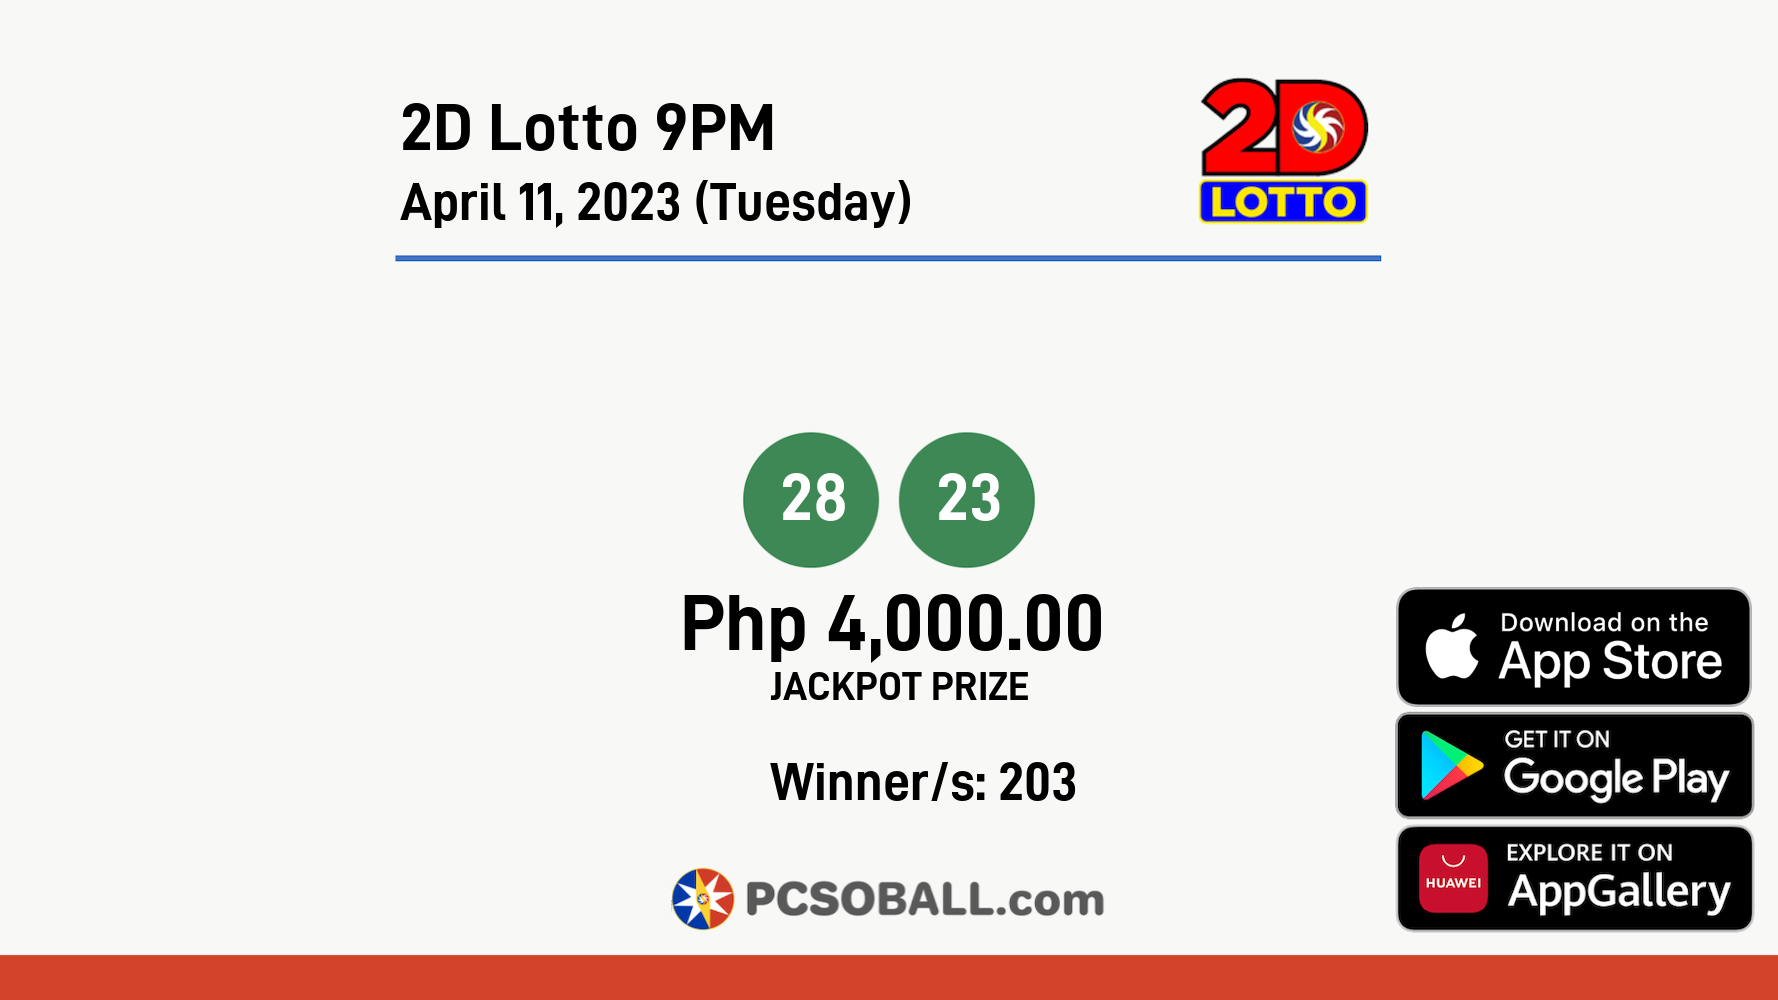 2D Lotto 9PM April 11, 2023 (Tuesday) Result